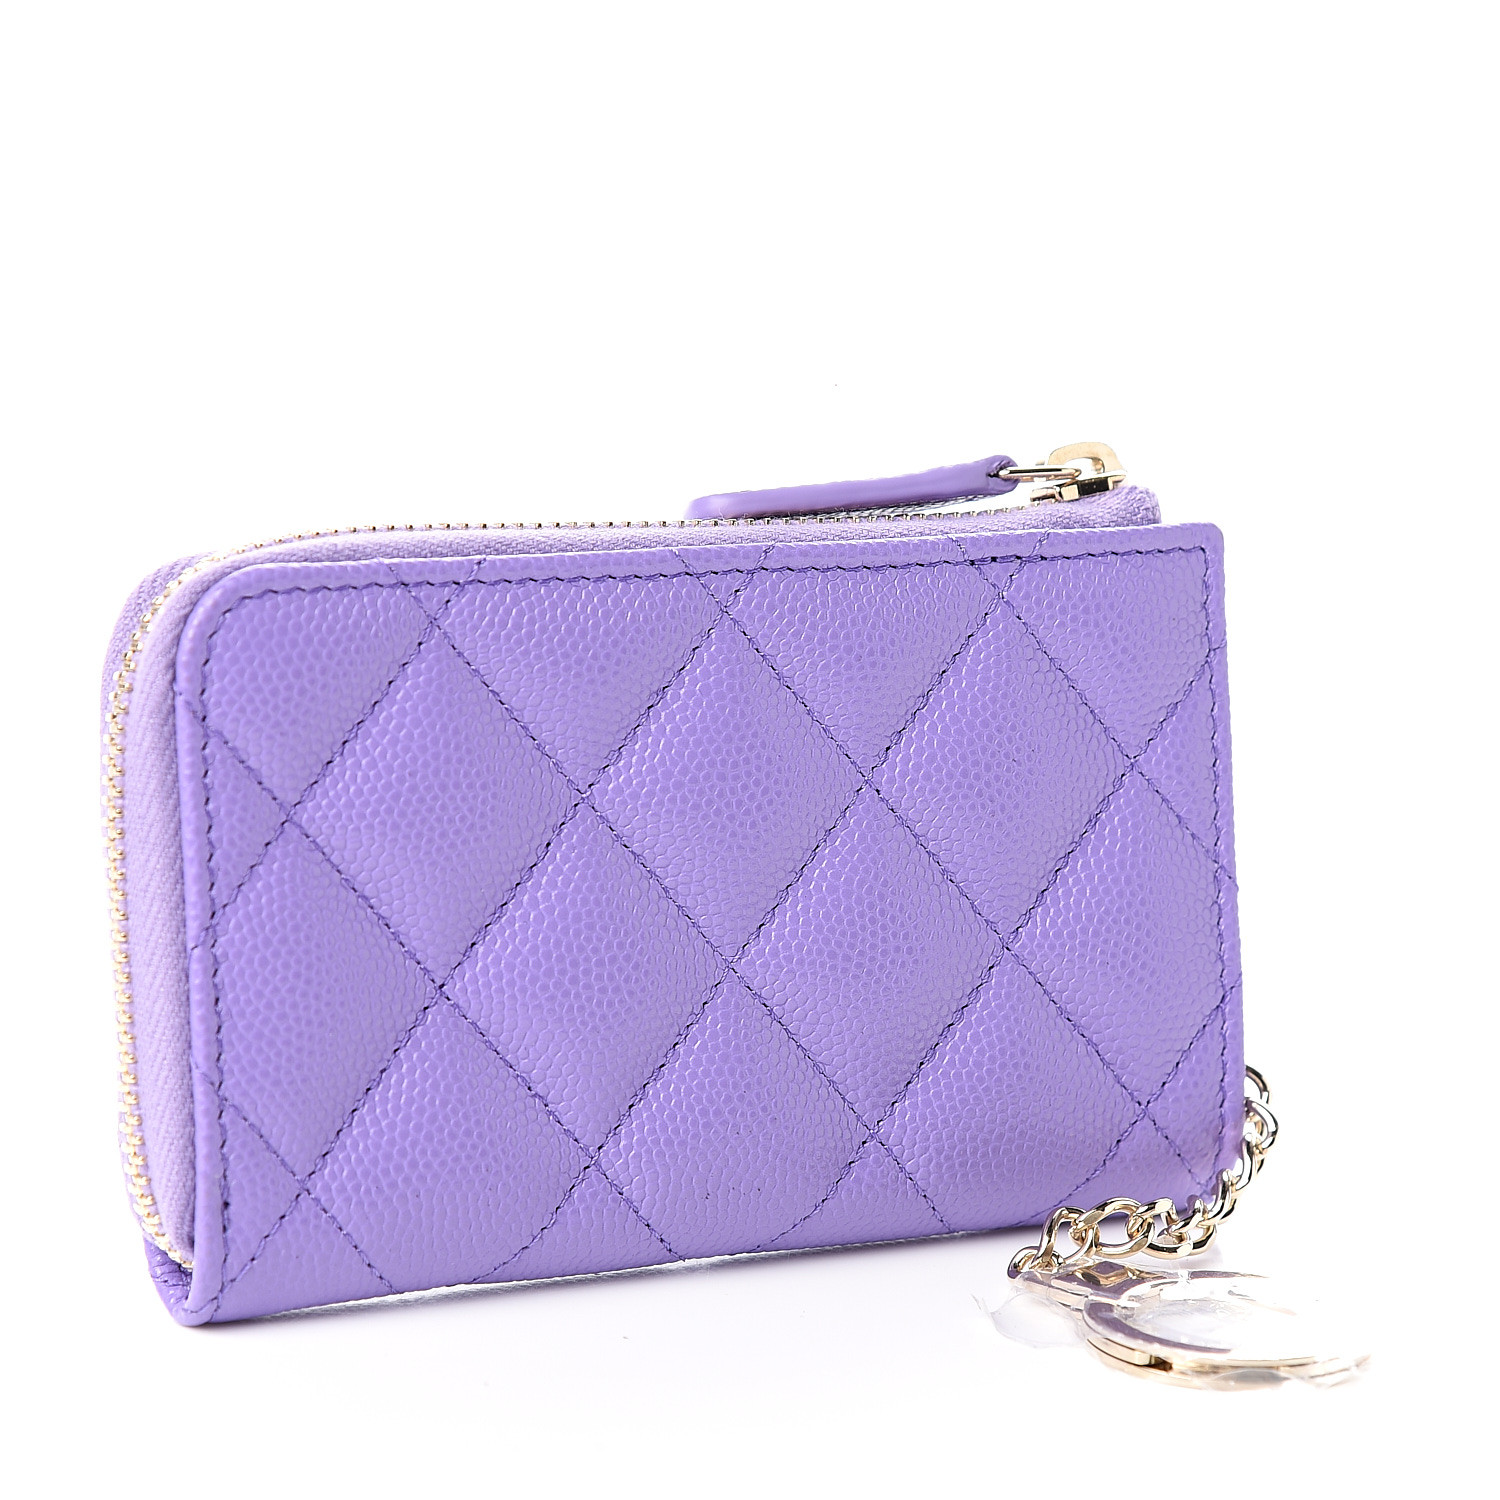 CHANEL Caviar Quilted Zipped Key Holder Case Purple 545540